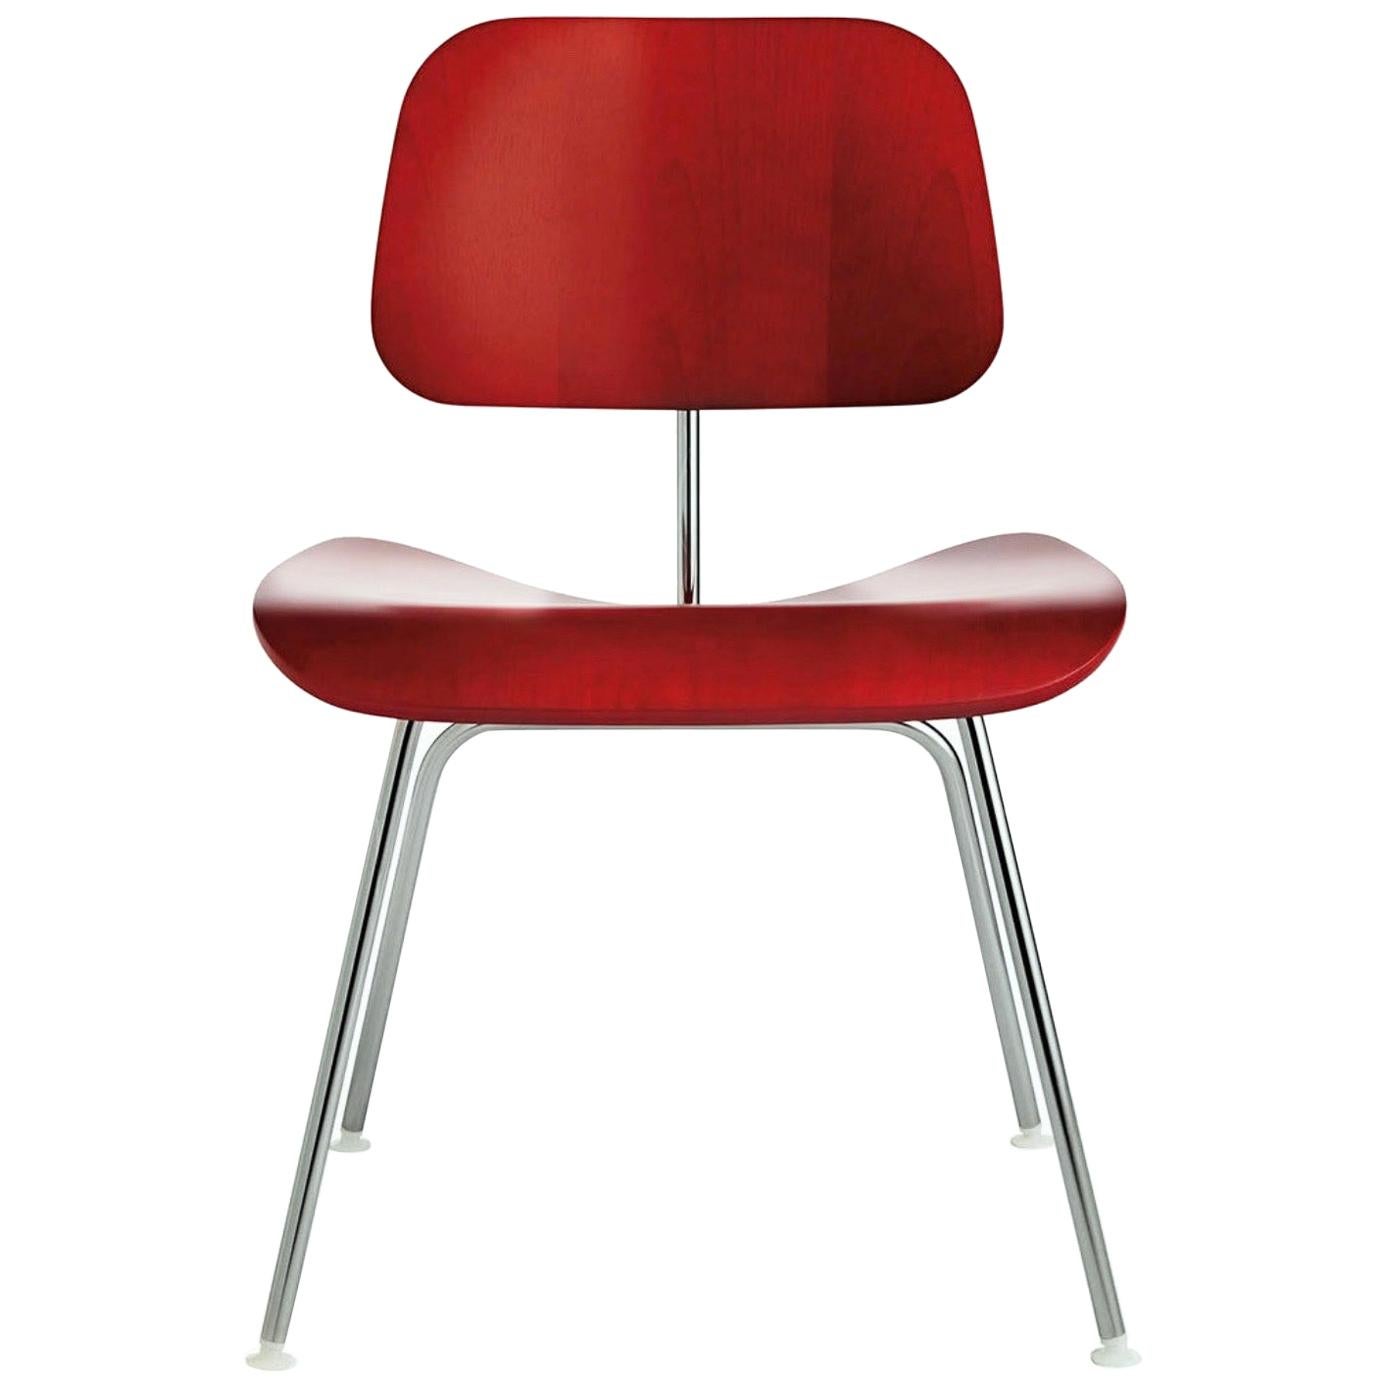 American Charles and Ray Eames Red Beech DCM Chair, Herman Miller, Dining, Side Chair